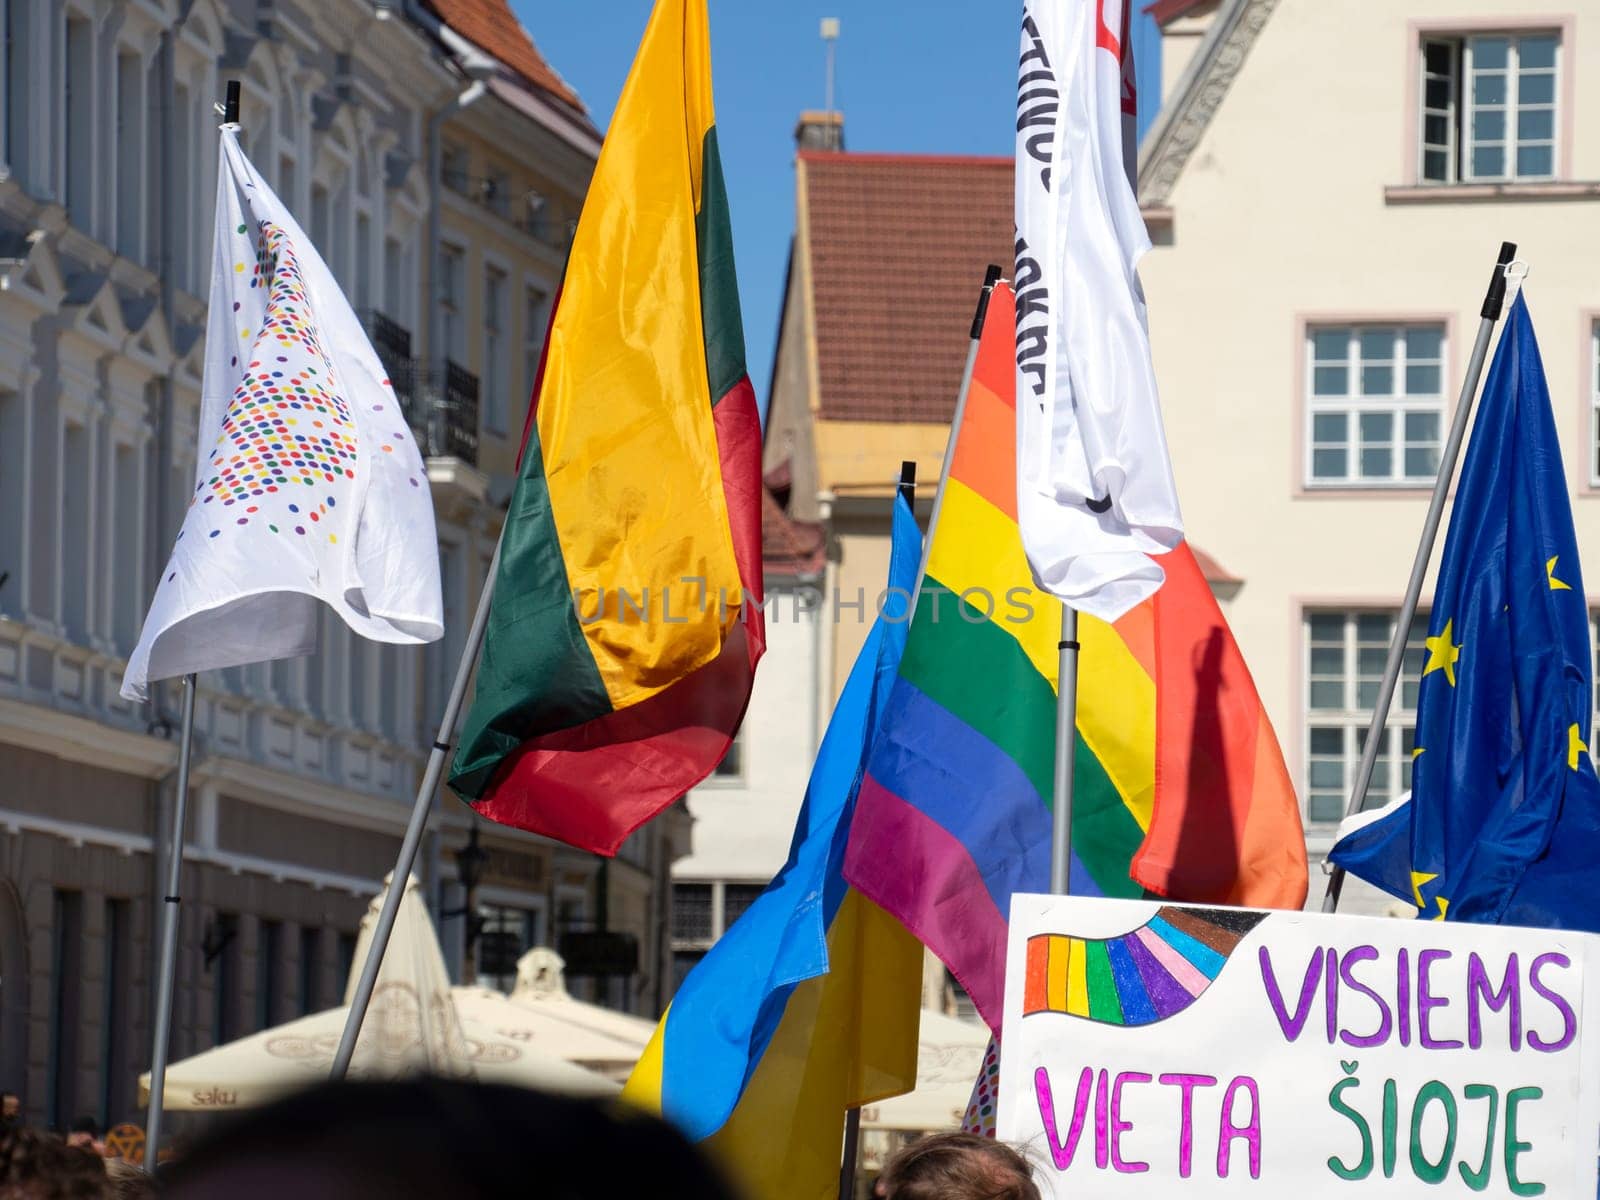 TALLINN, ESTONIA - JULY, 08, 2017: Annual gay pride parade of freedom and diversity, happy participants walking by Dimidov27@mail.ru